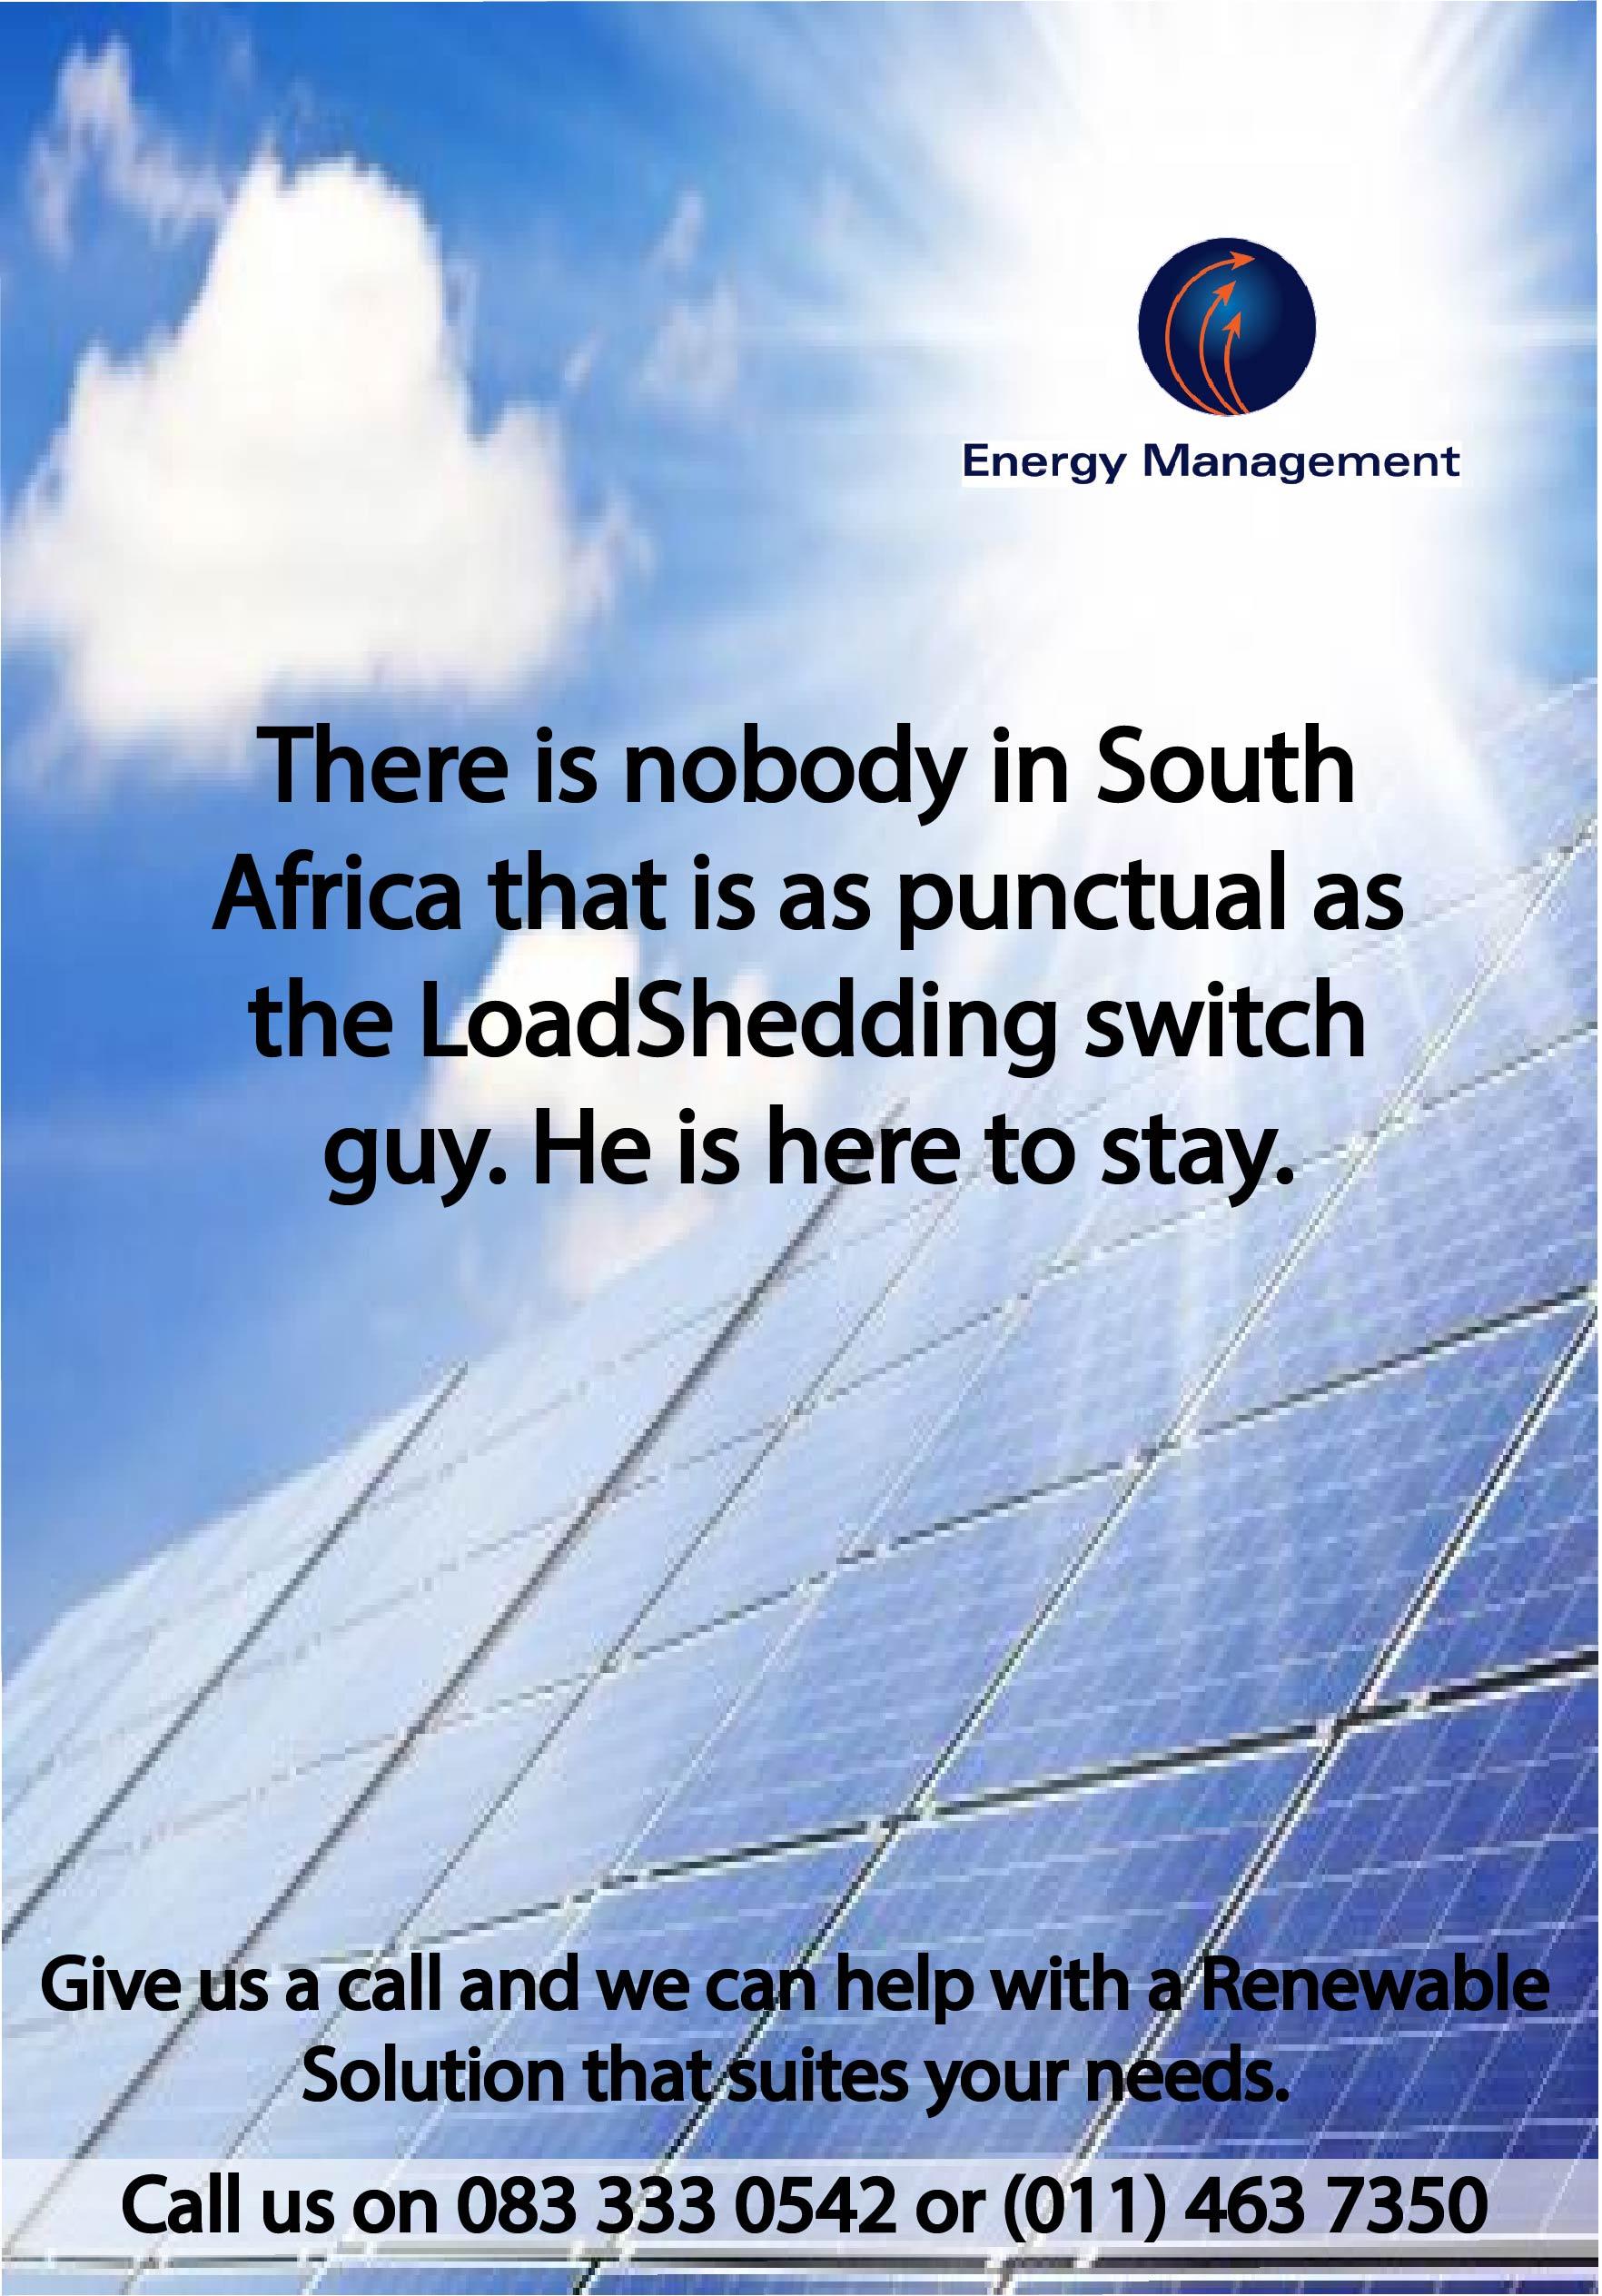 Product Loadshedding is here to stay- Contact us for Renewable Energy Solutions (Finance Available) - Energy Management SA image